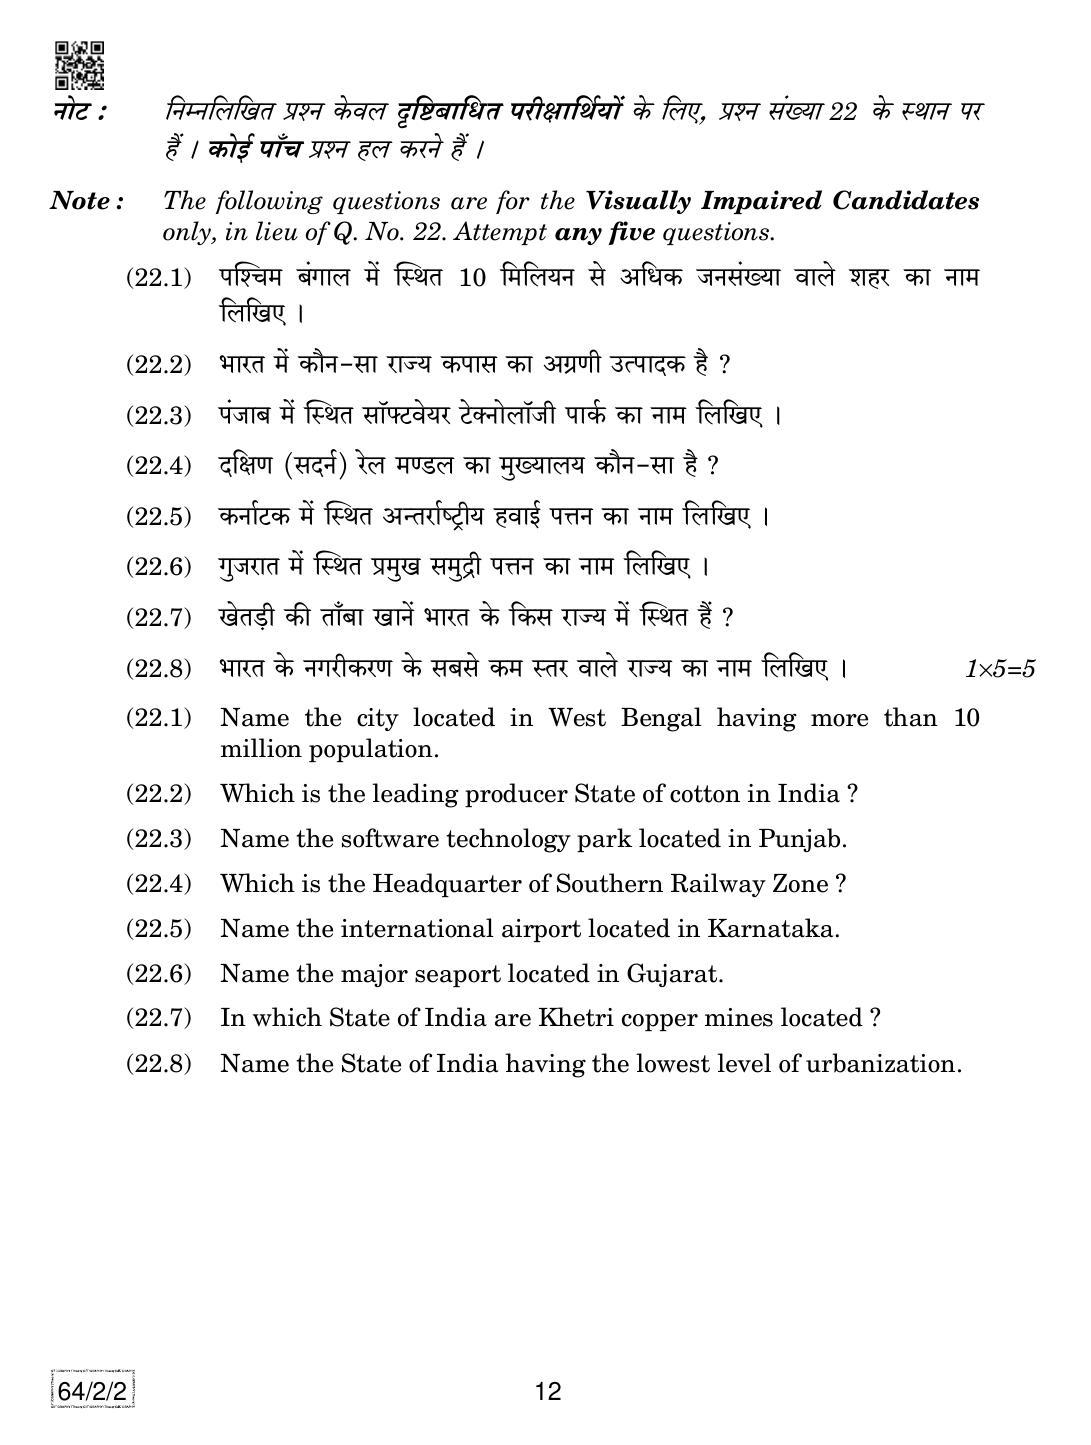 CBSE Class 12 64-2-2 Geography 2019 Question Paper - Page 12